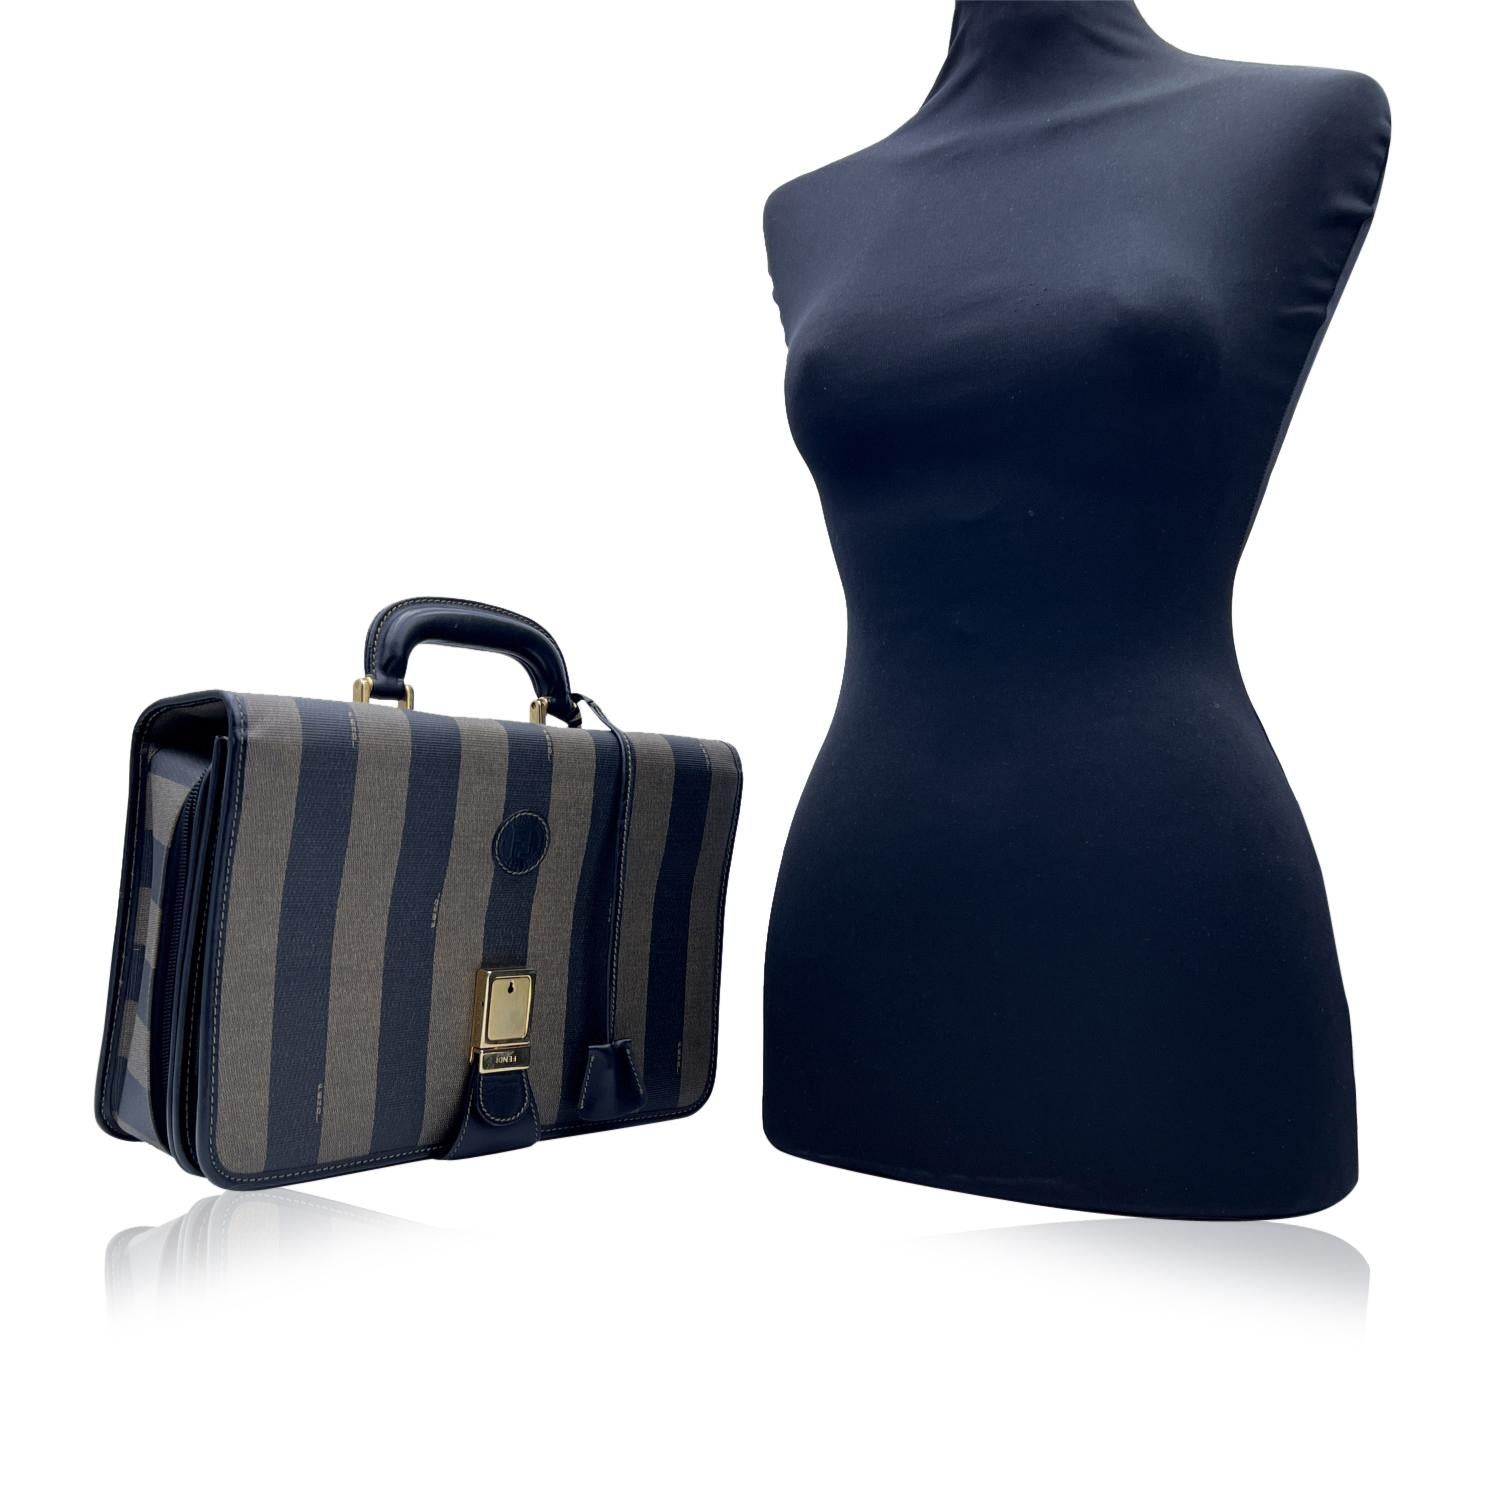 Beautiful Fendi Pequin small briefcase/handbag. Crafted of striped pequin canvas with black leather handle and trim. The bag features a key push closure (key is not included),1 compartment with flap and button closure and 1 large compartment with